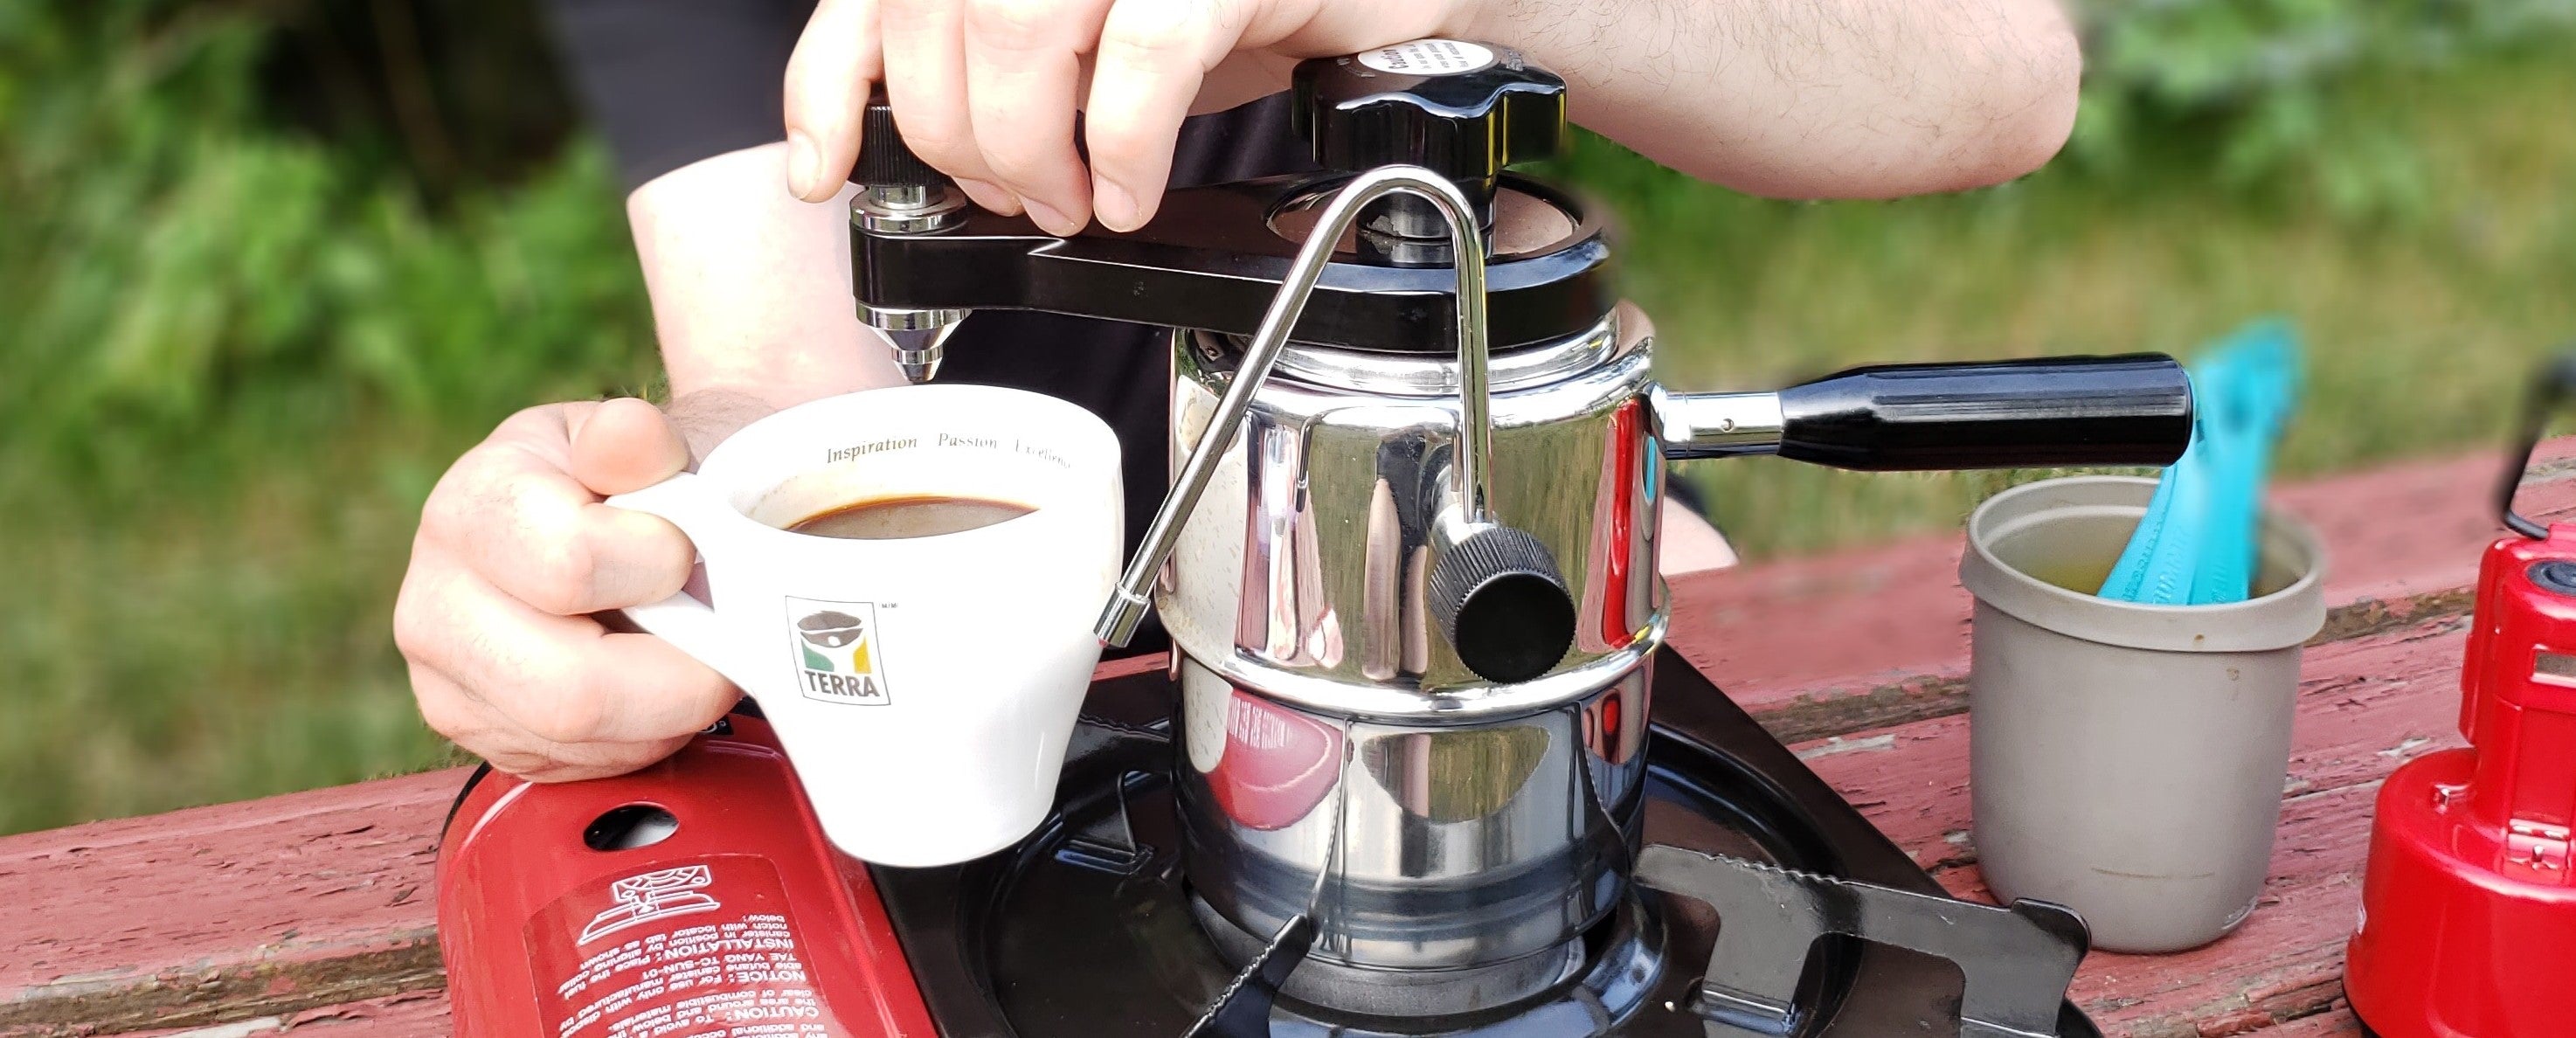 How To Make The Best Camping Coffee – Bellman Espresso